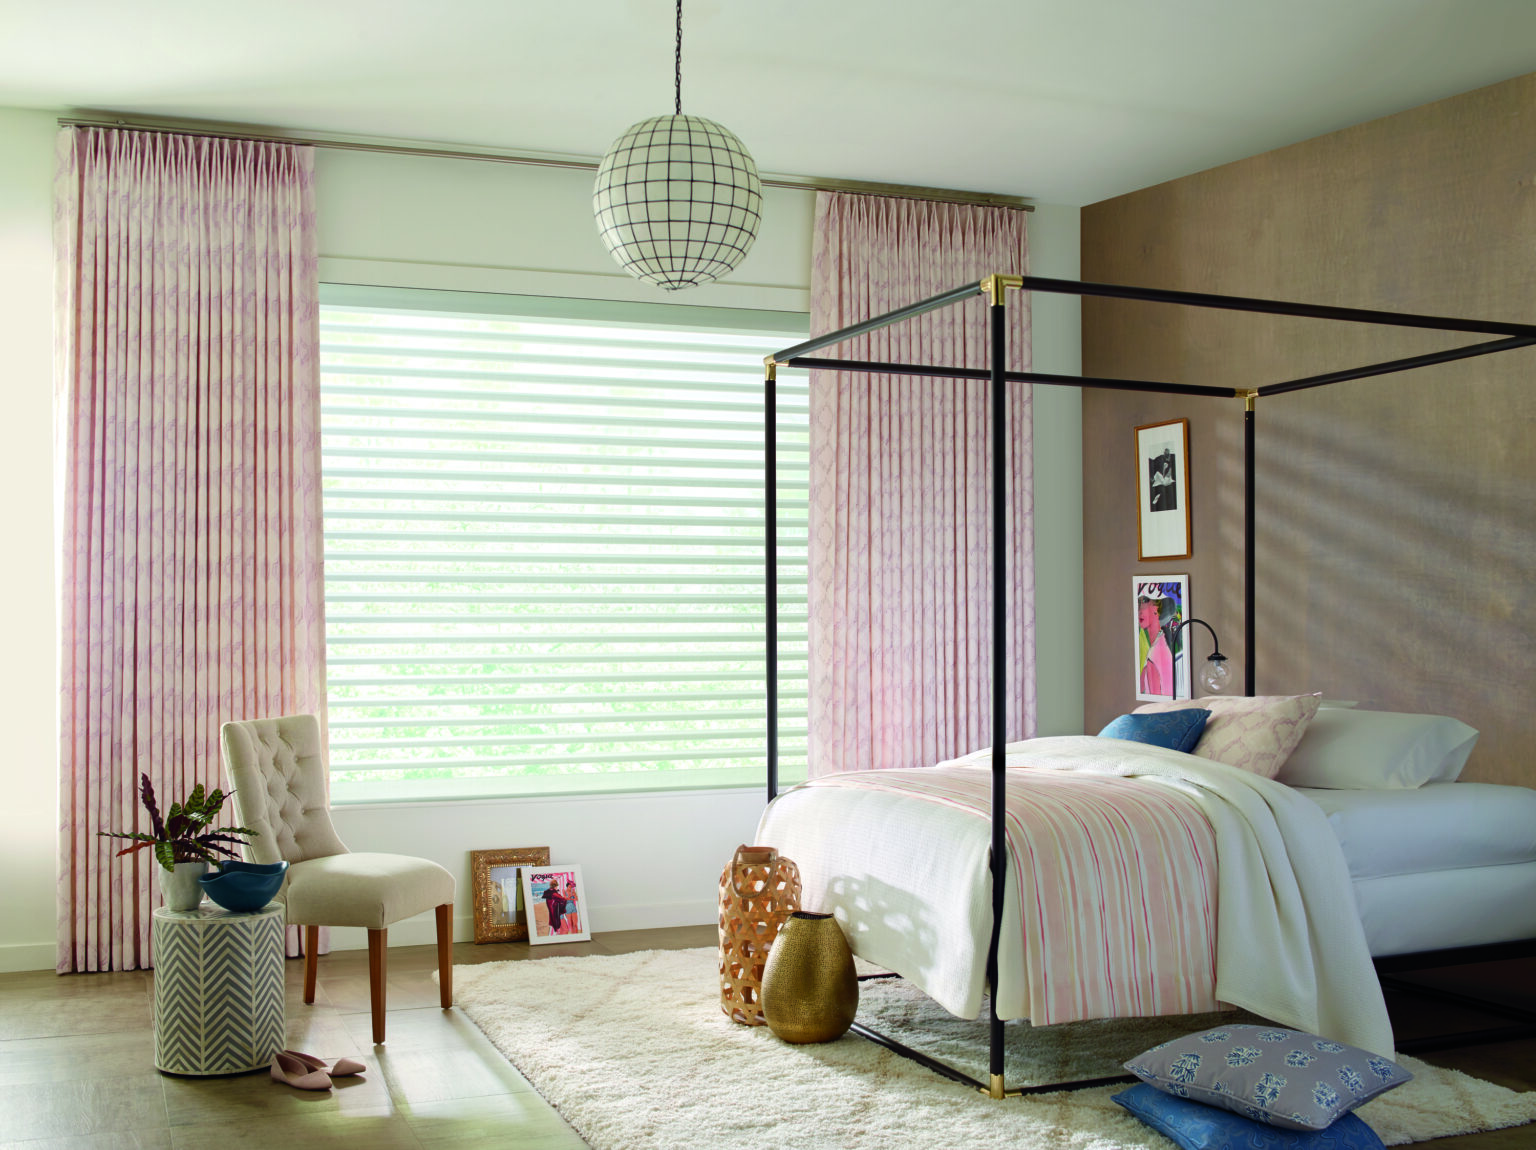 2 pinch Euro pleat traversing draperies over sheer shades add warmth and personality to create your bedroom haven (1)